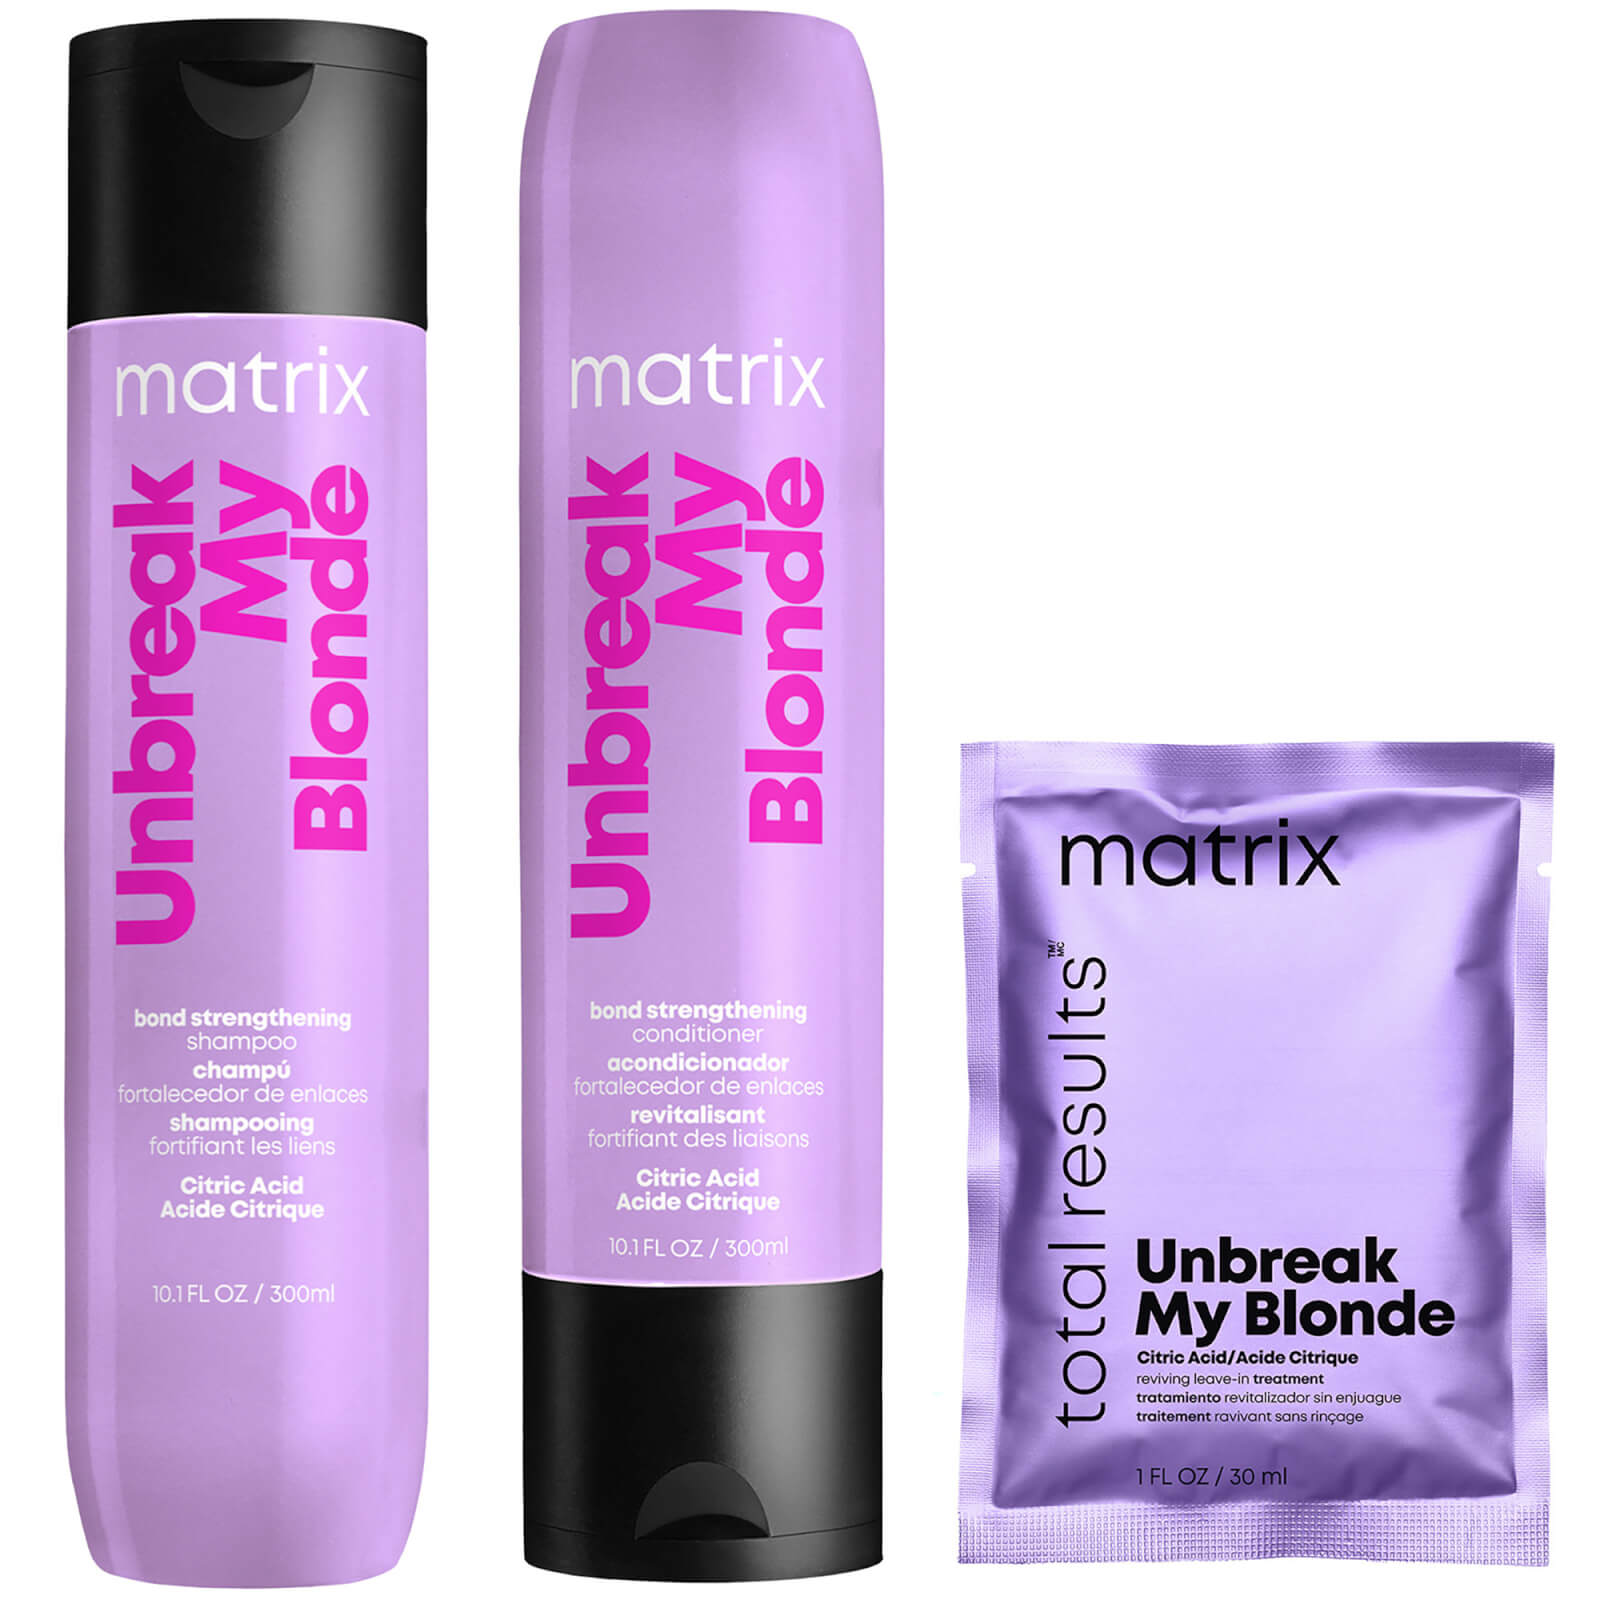 Matrix Unbreak My Blonde Shampoo, Conditioner and Leave-in Travel Size Bundle for Chemically Over-pr